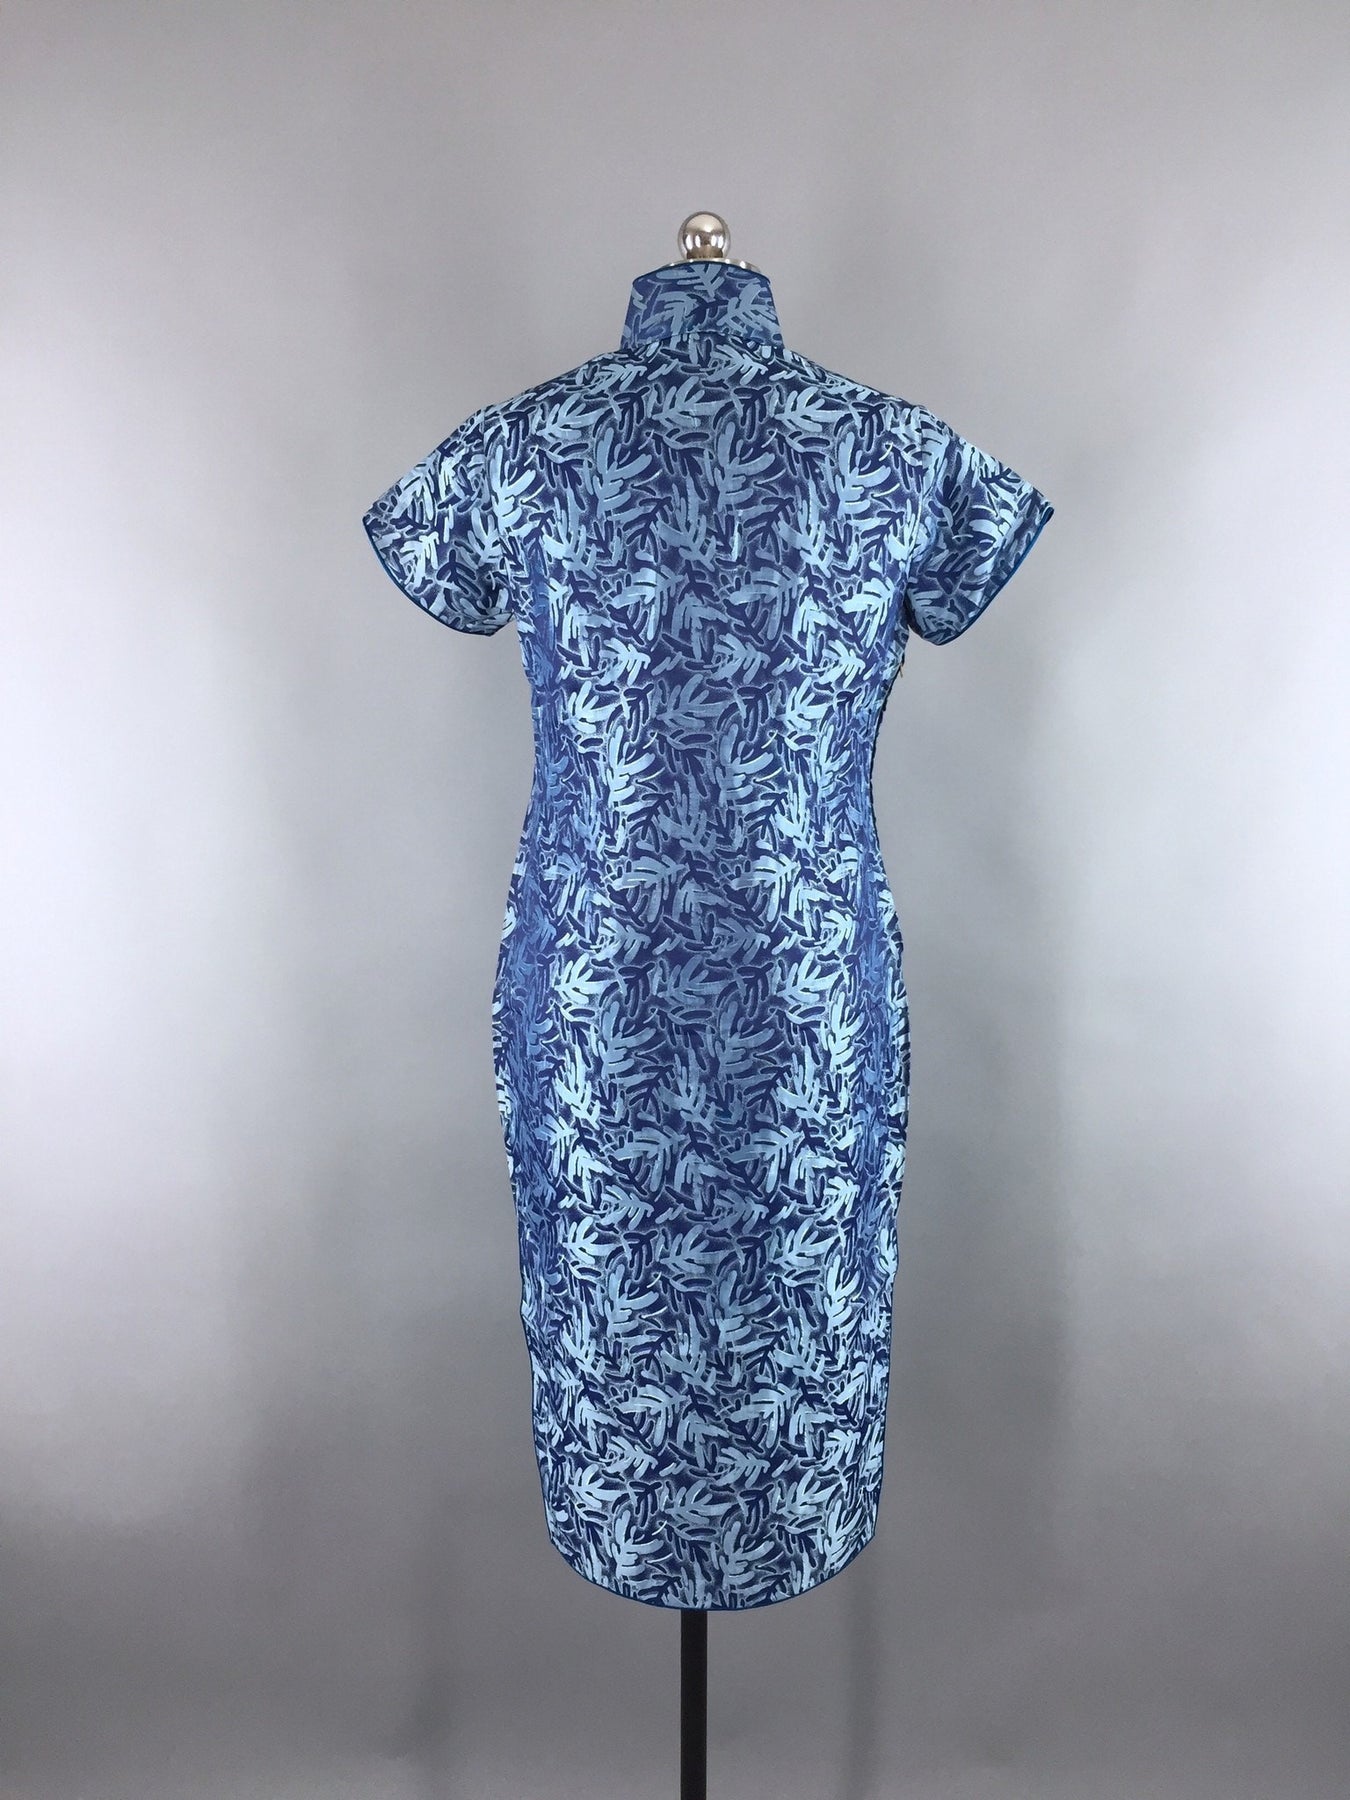 Vintage 1940s Blue and Silver Satin Damask Qi Pao Cheongsam Dress ...